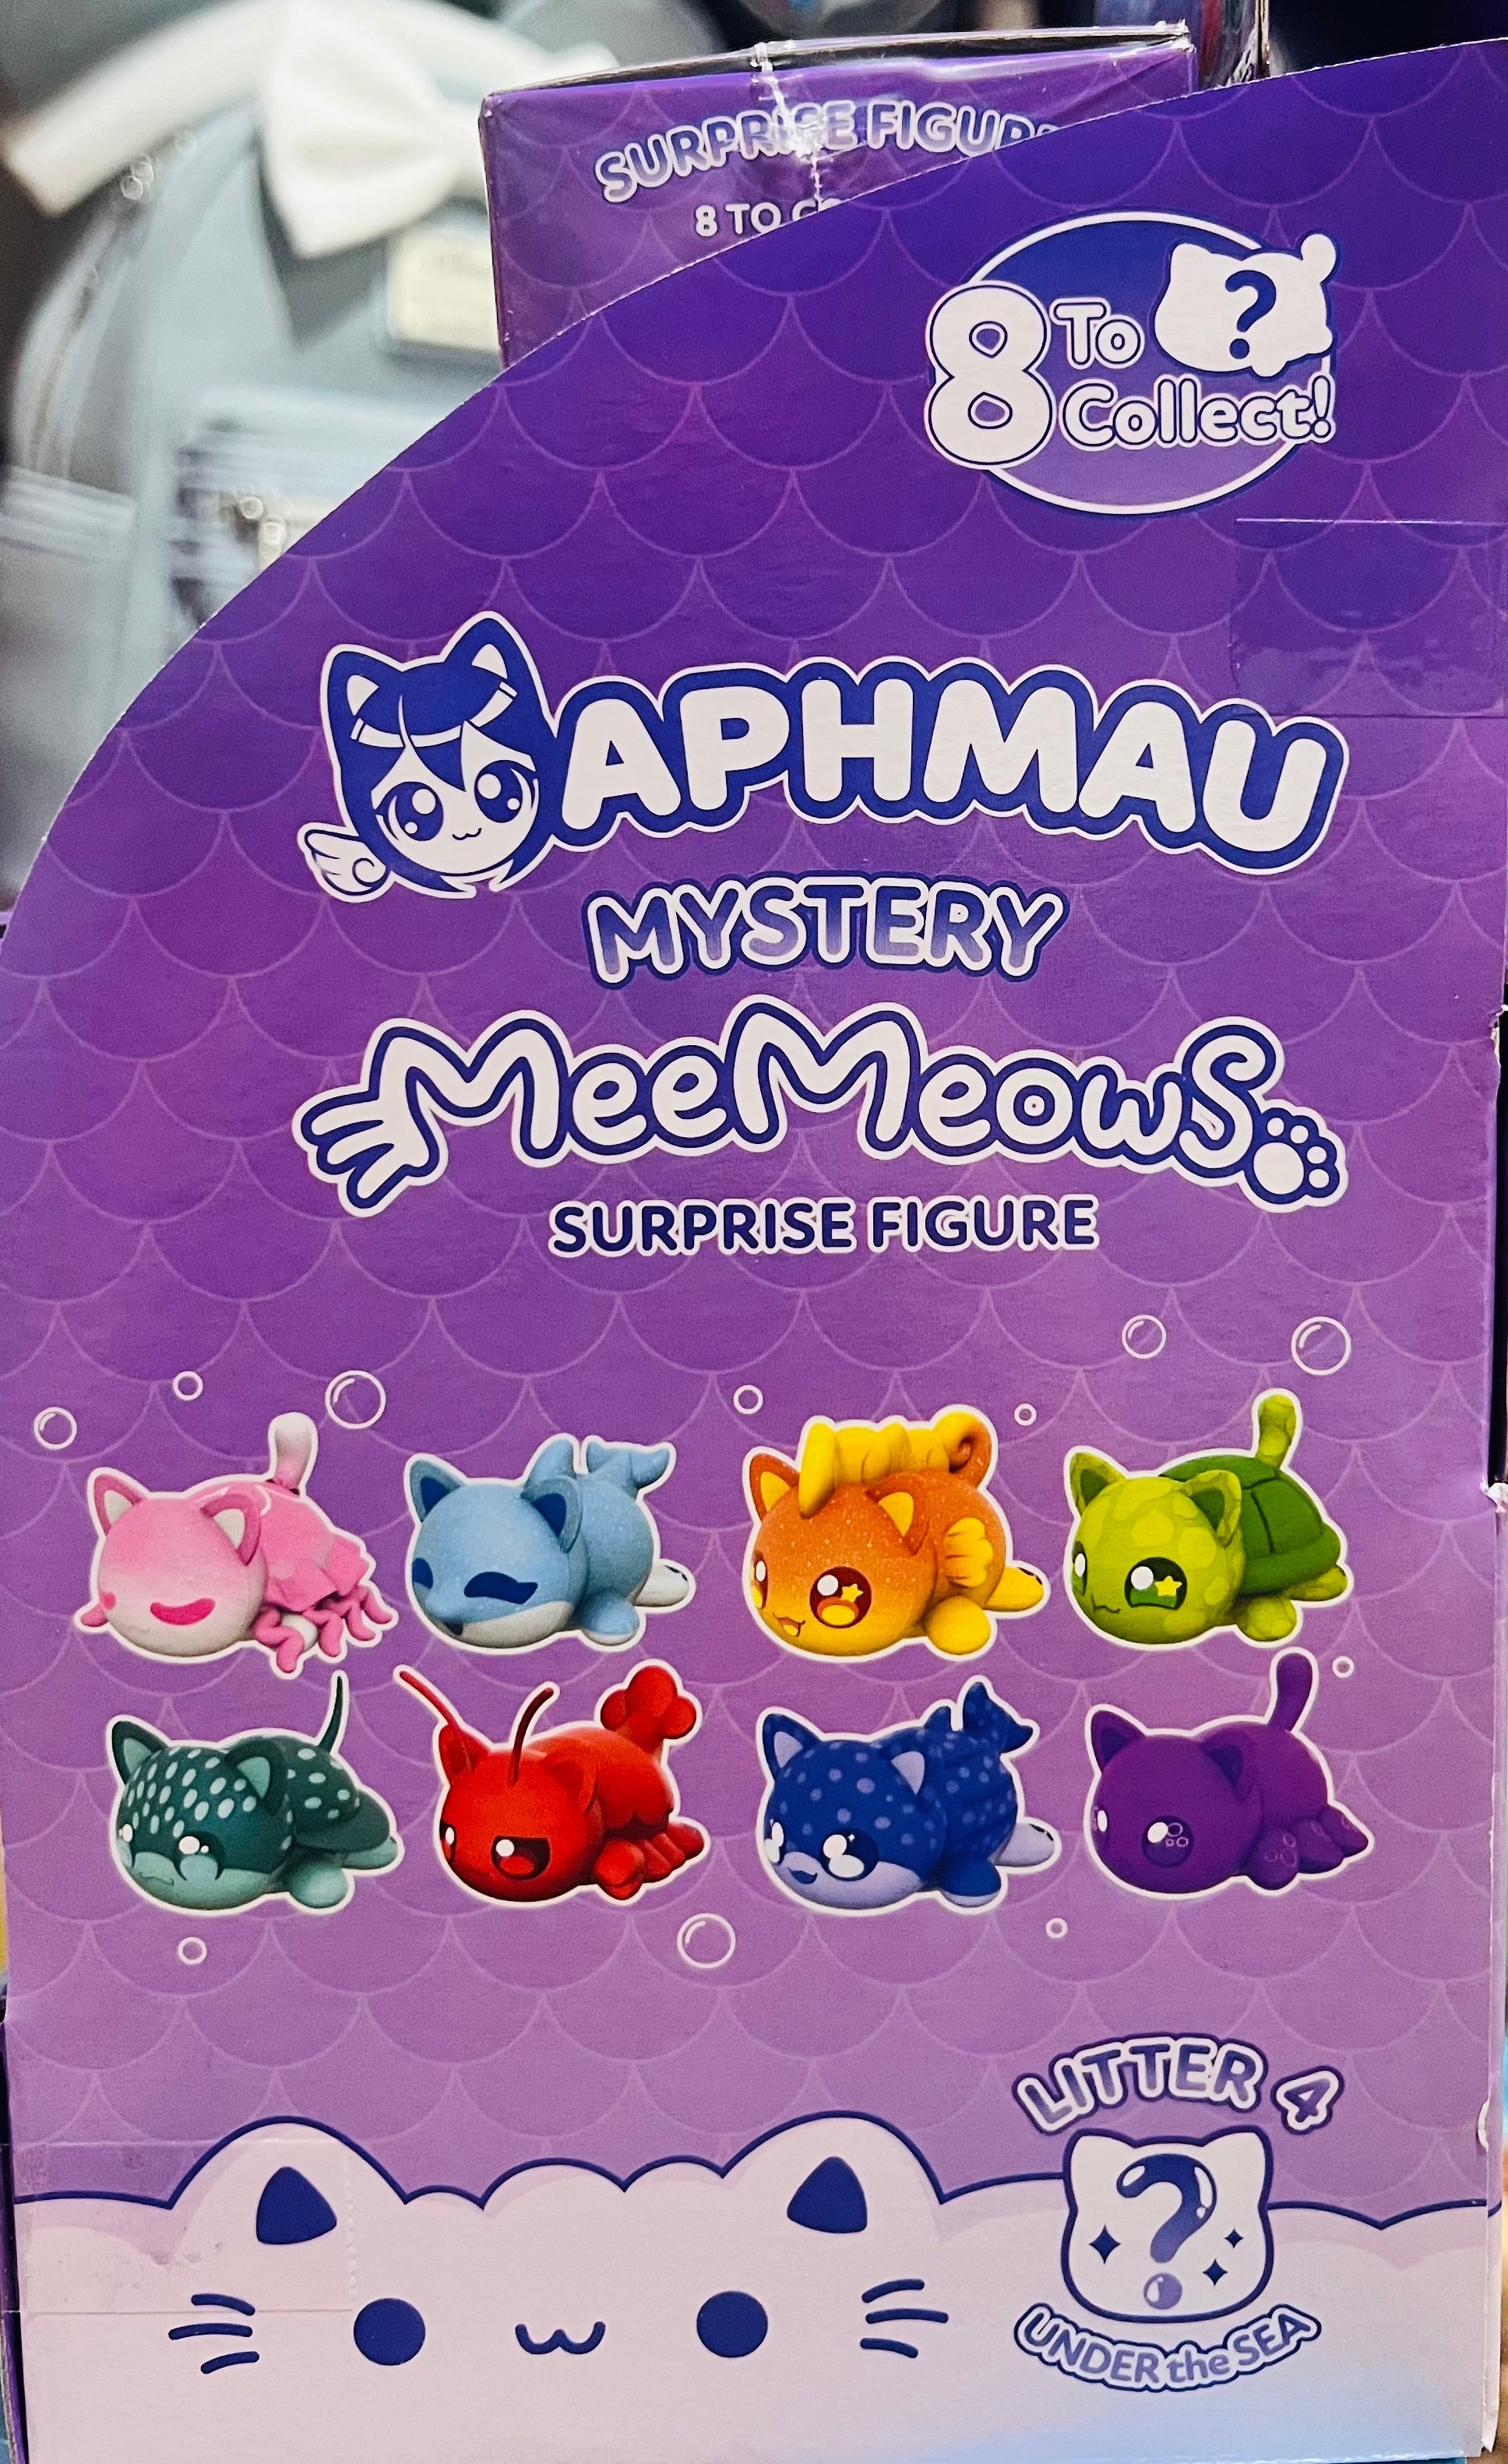 Unopened WhOLE box (12) - APHMAU Mystery MeeMeows Blind Bags - Series 4